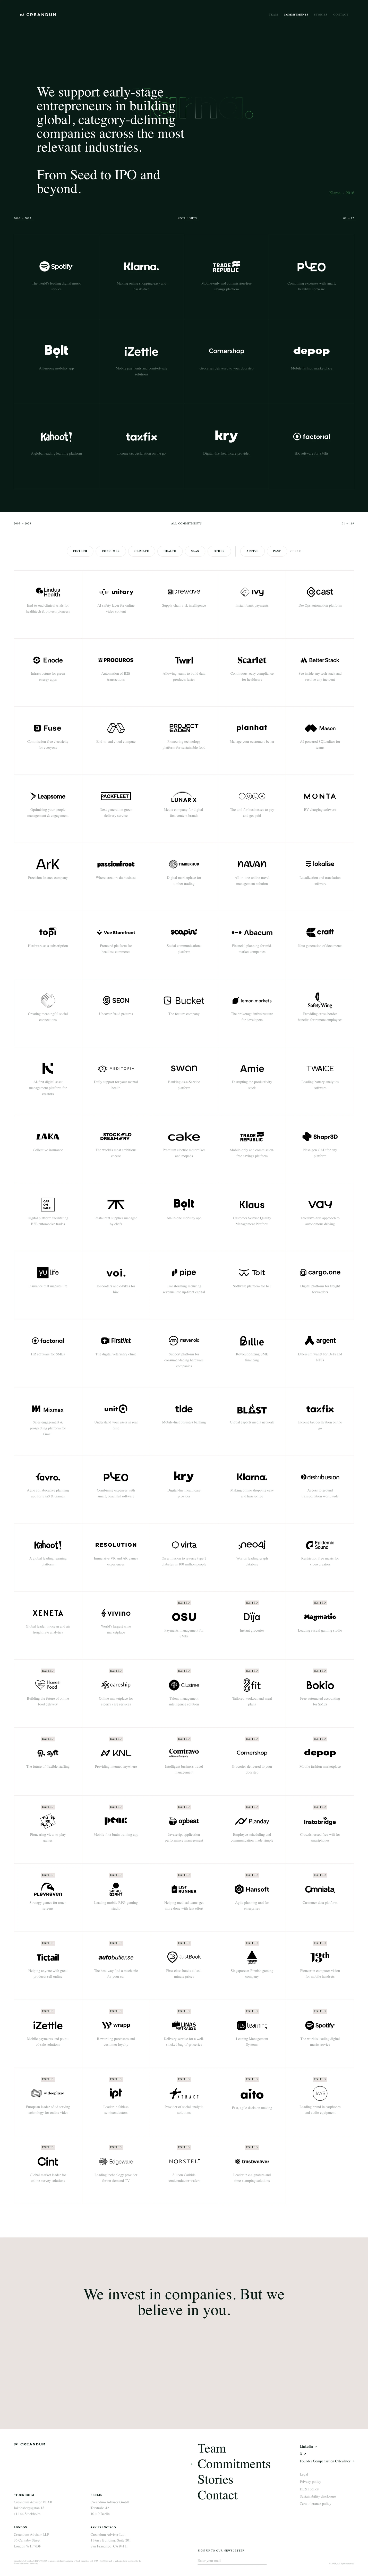 Creandum Landing Page Example: We support early-stage founders in building global, category-defining companies. From Seed to IPO and beyond.